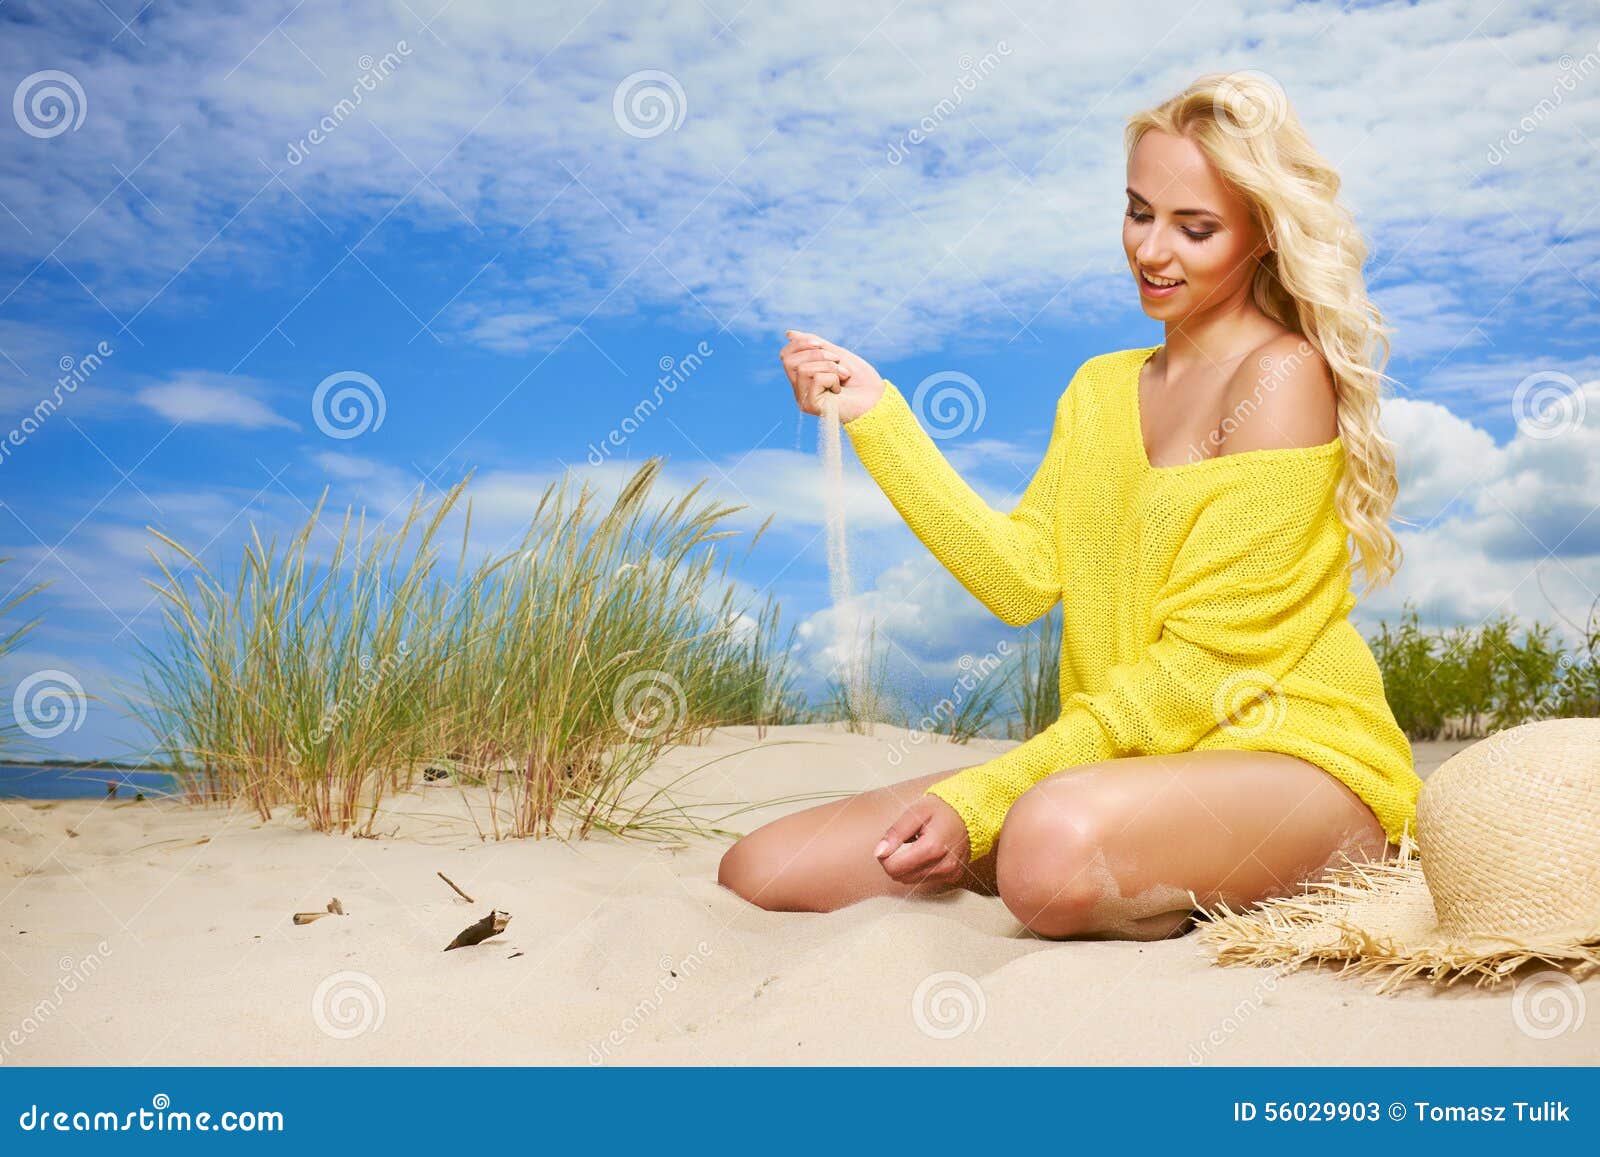 Blonde Girl On The Beach Stock Image Image Of Figure 56029903 